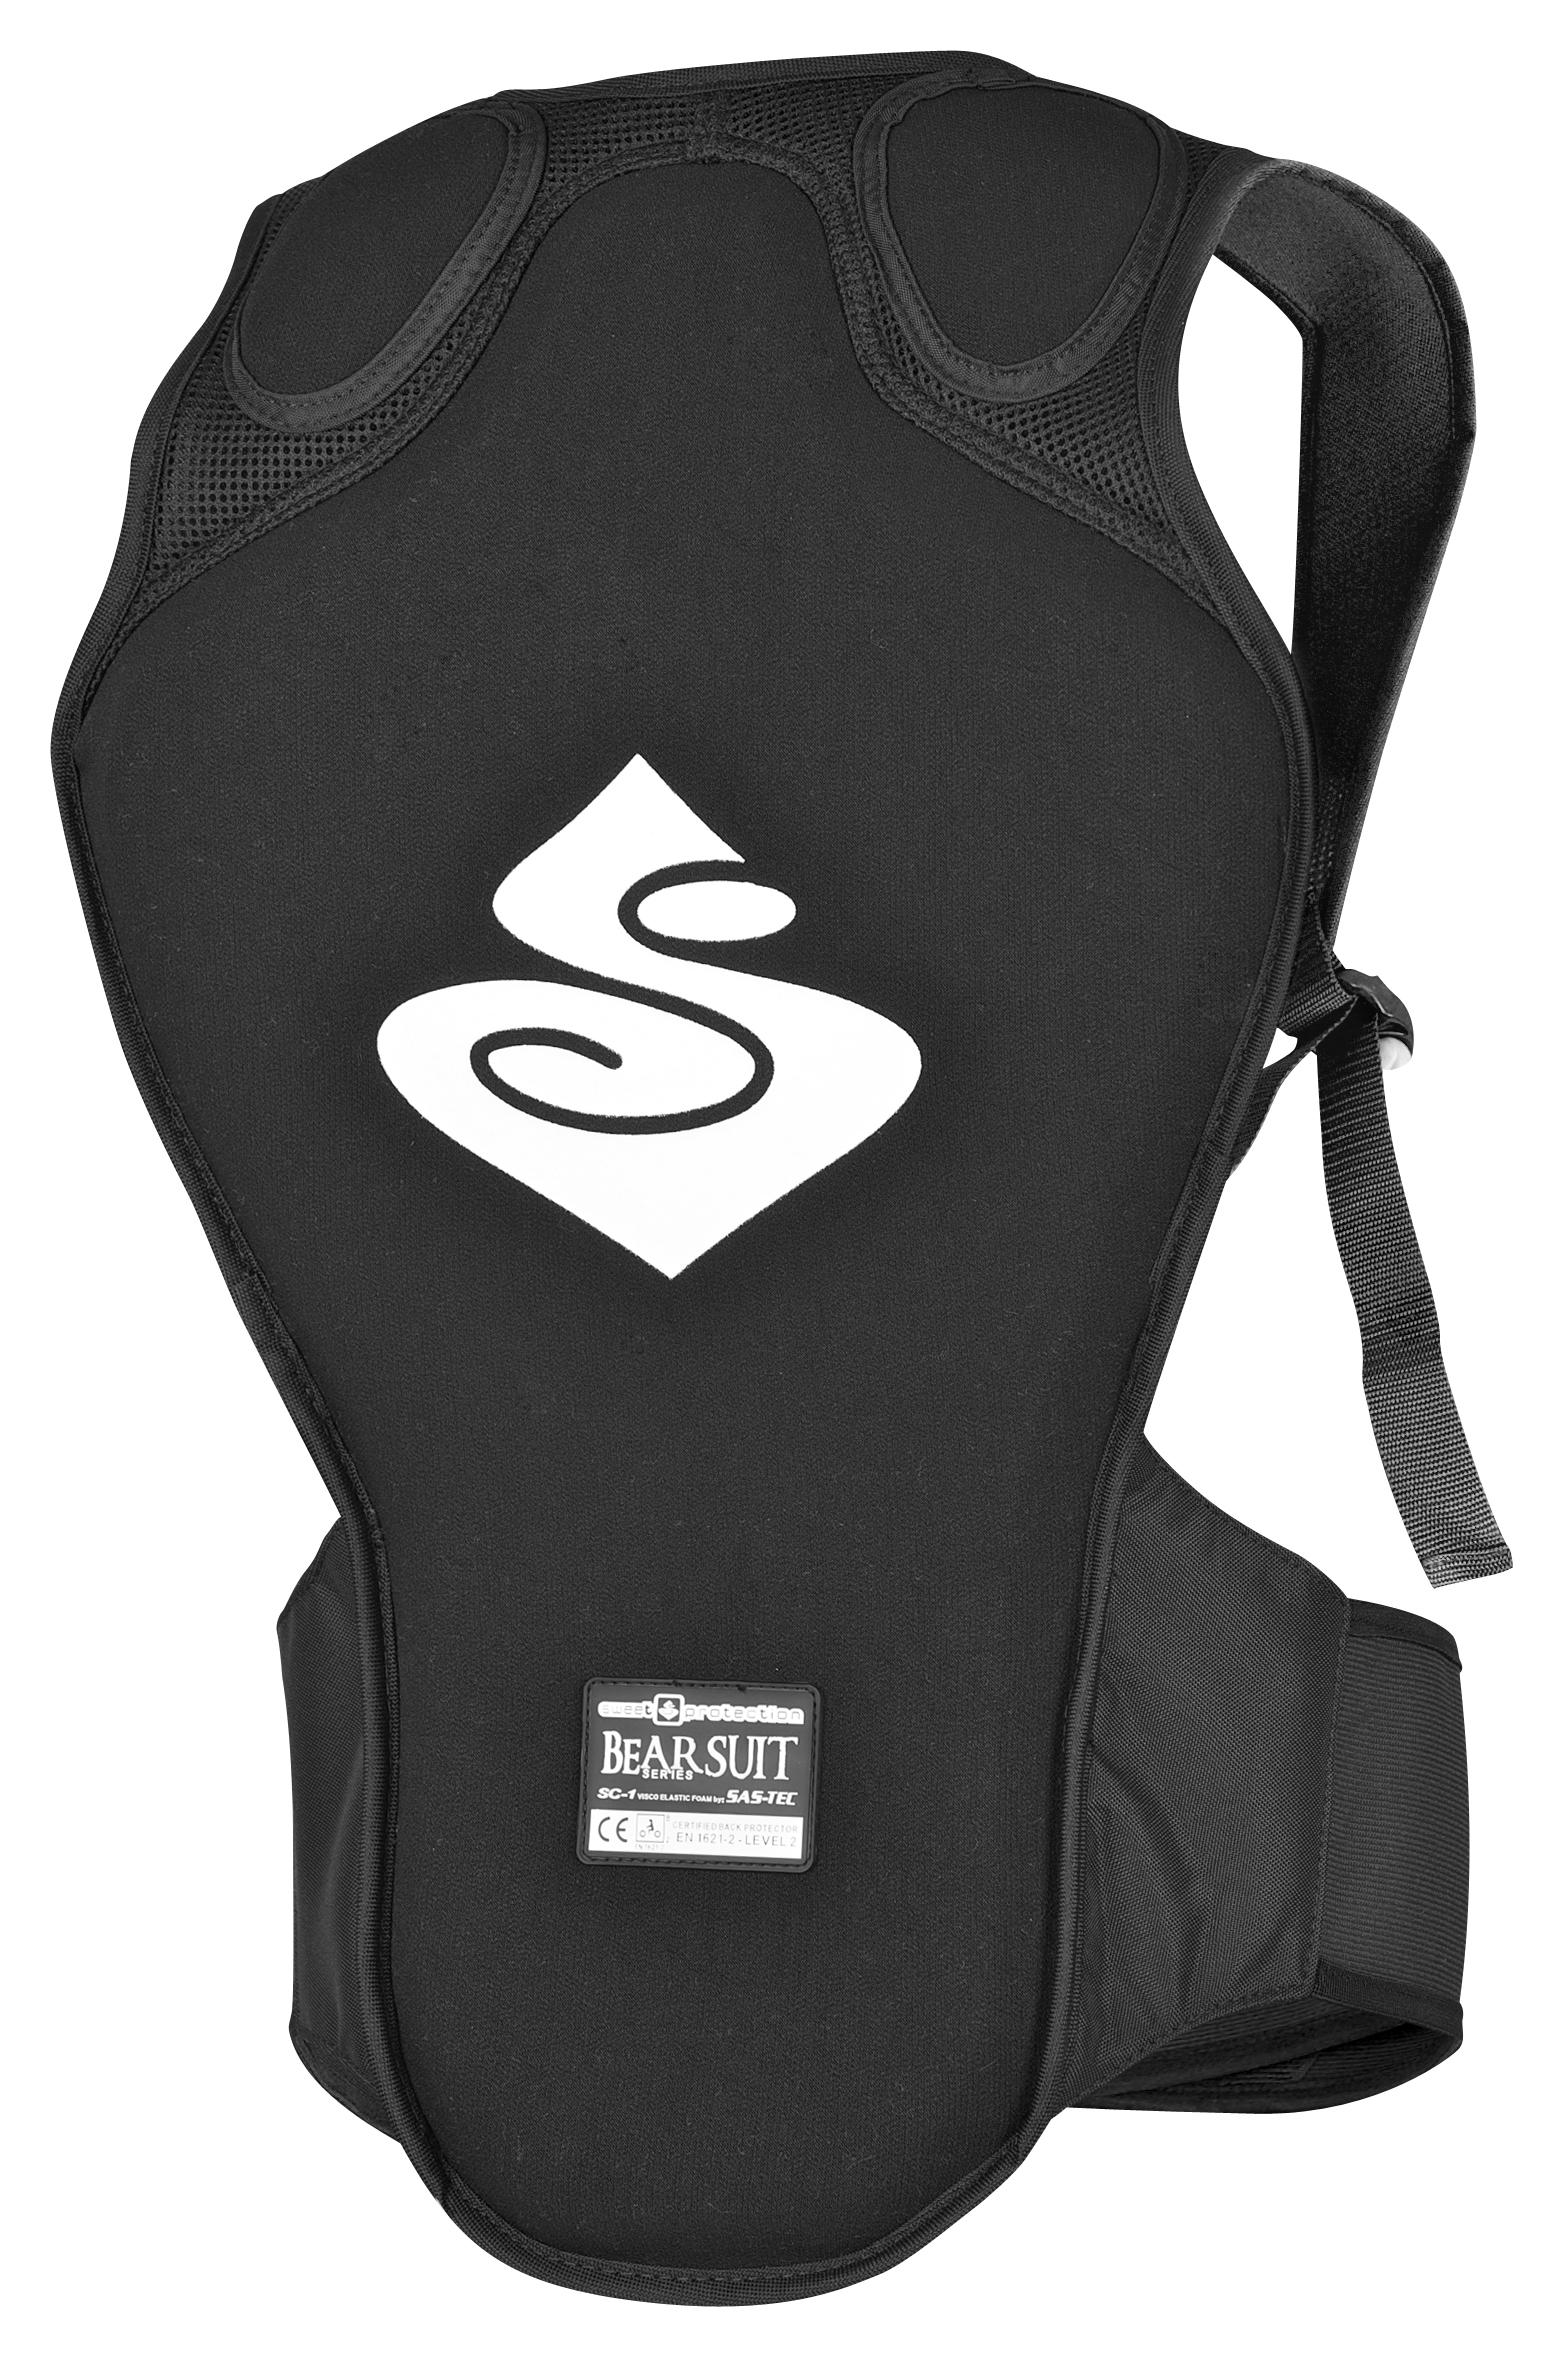 Foto Sweet Protection Bearsuit Back Protector Protectores black negro, m/l